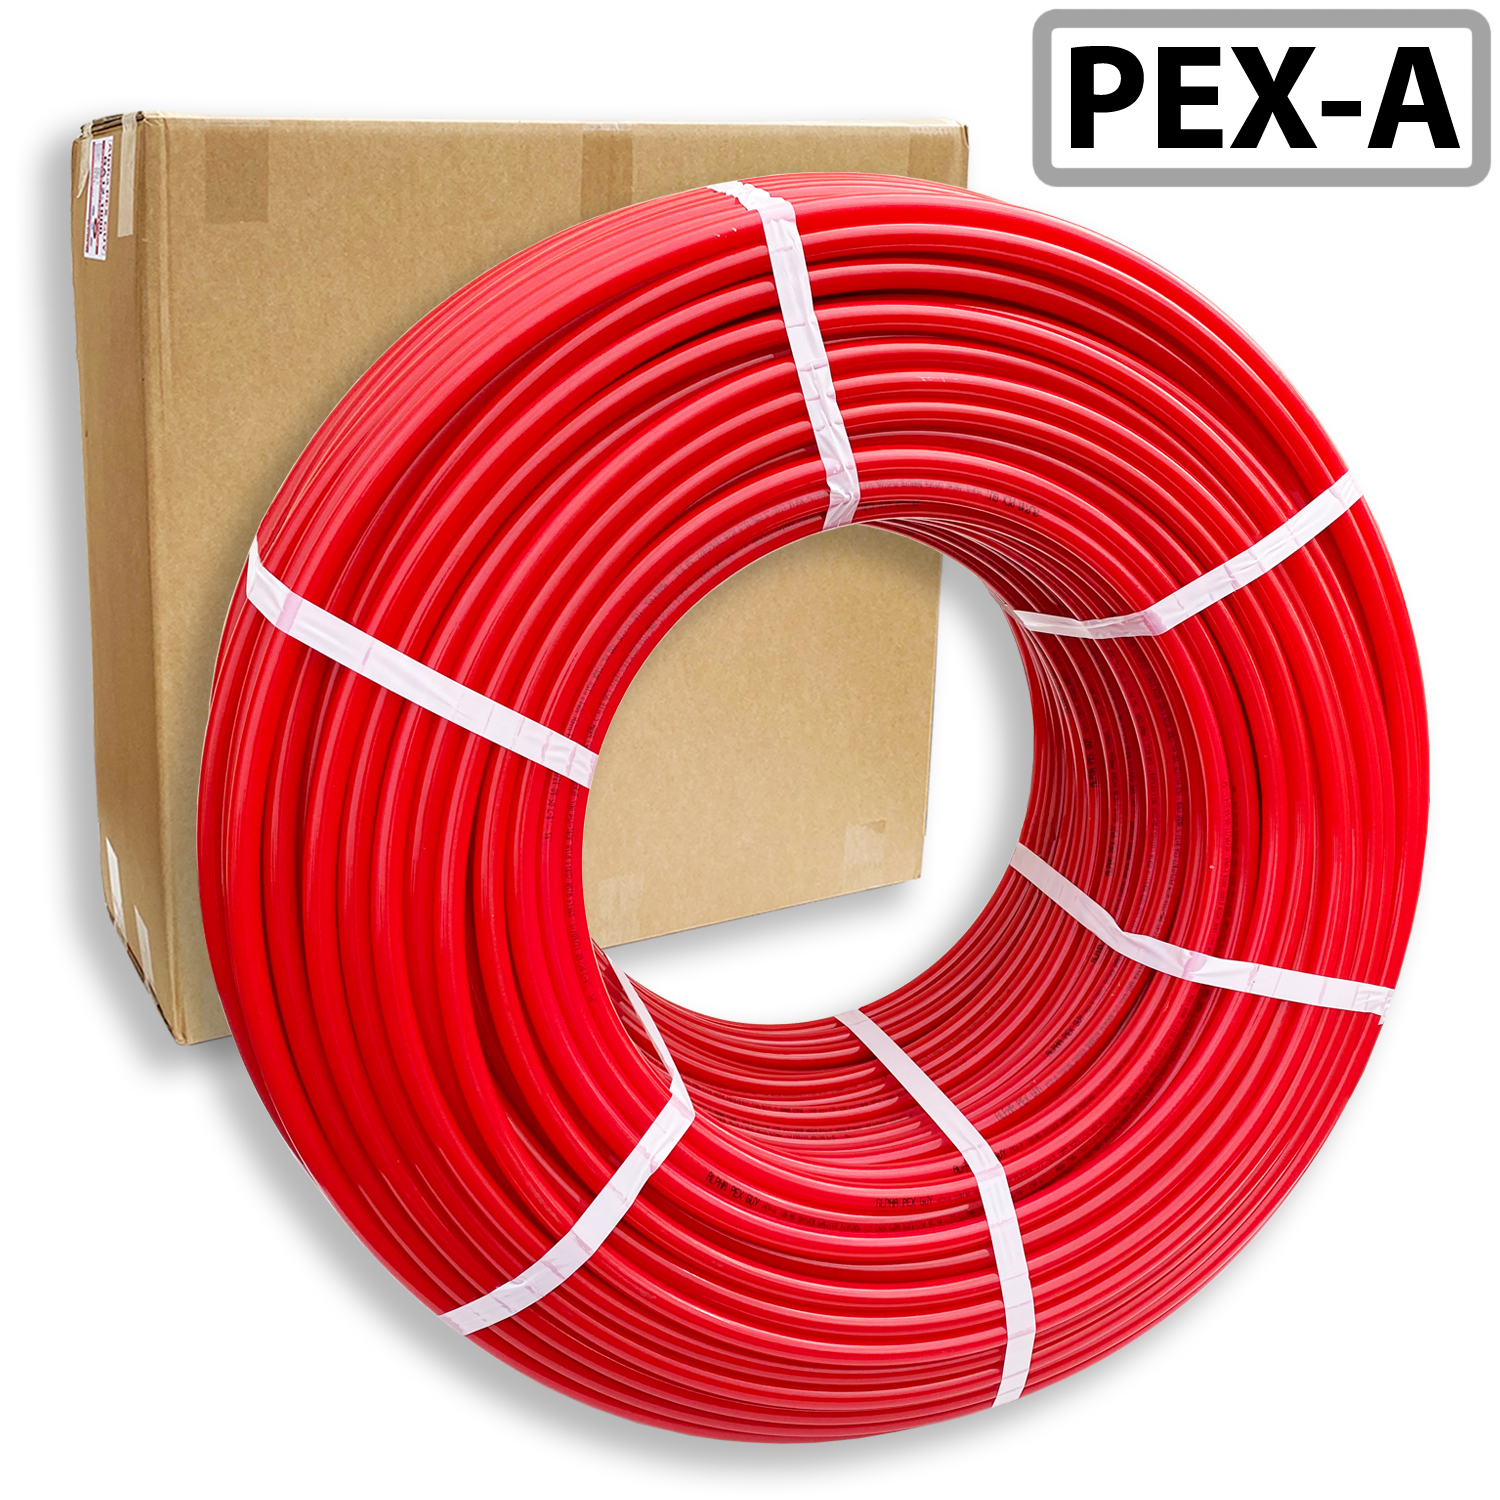 3/4" x 500ft PEX Tubing for Potable Water FREE SHIPPING 